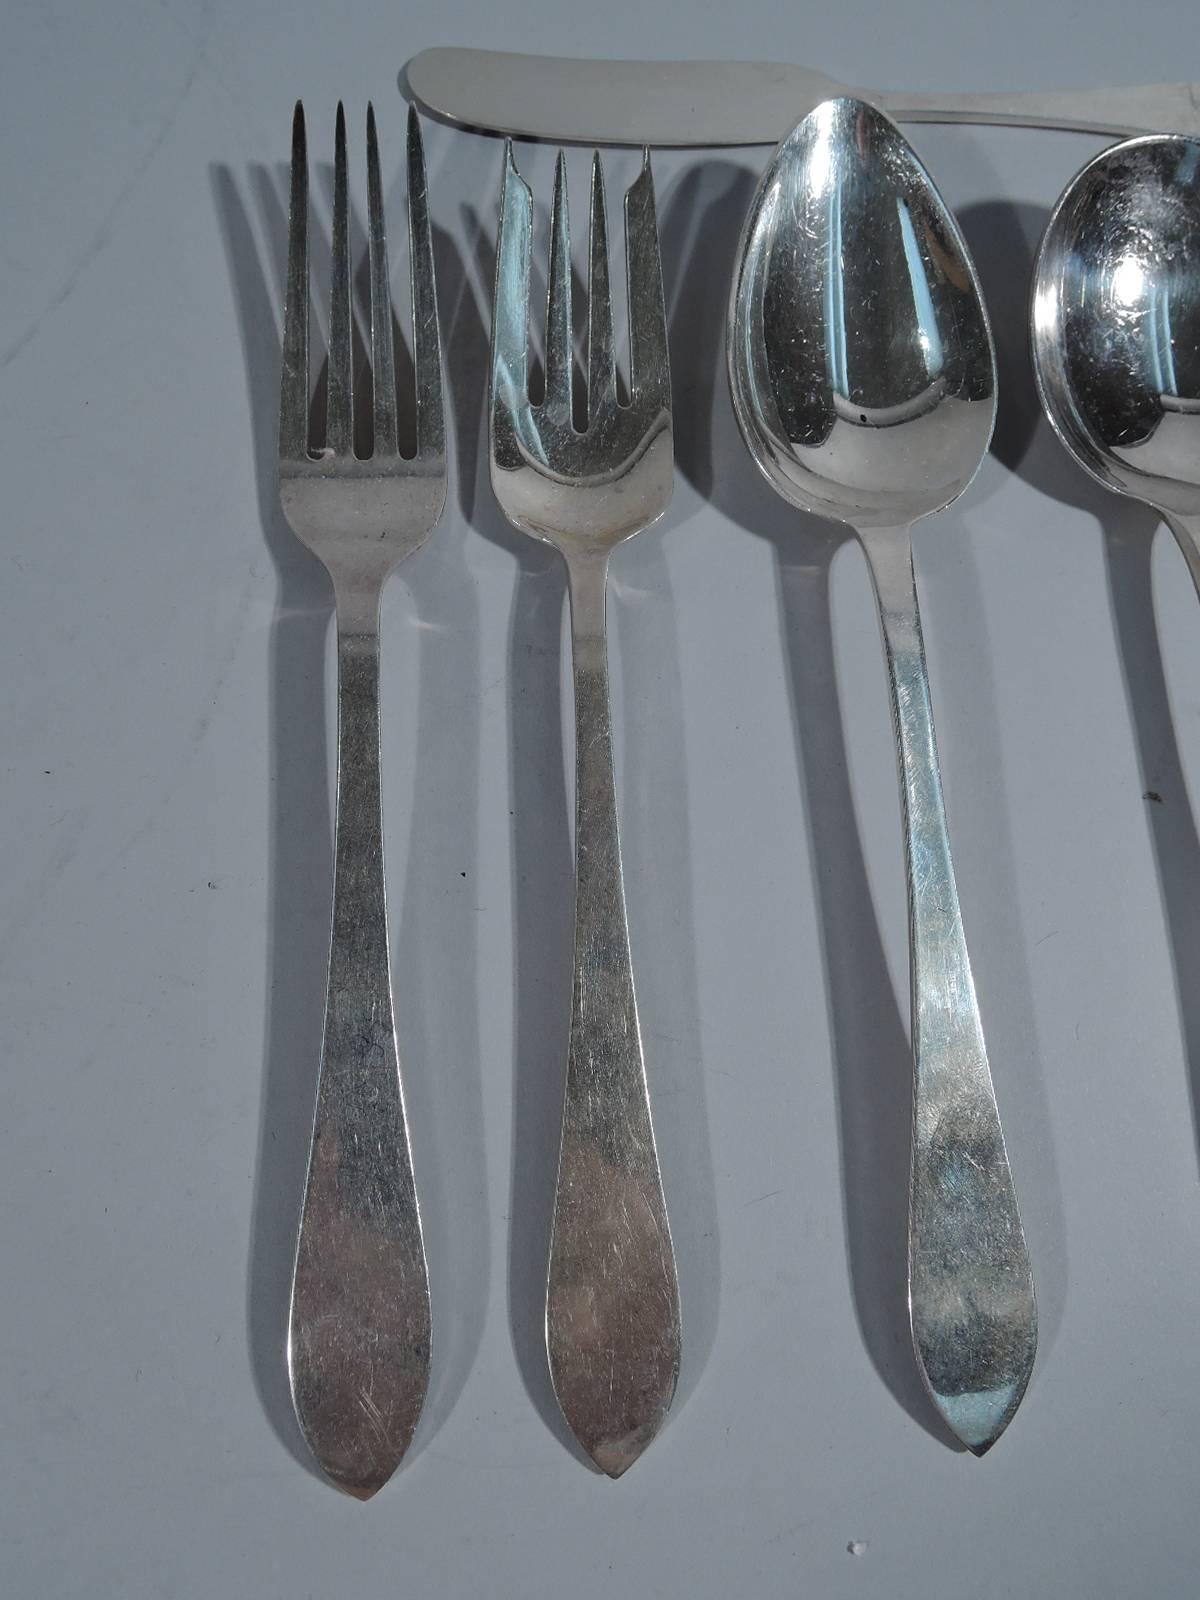 Sterling silver service in Faneuil pattern. Made by Tiffany & Co. in New York. This set comprises 105 pieces (all dimensions in inches): Knives: 12 knives (9 1/4) and 12 butter spreaders (5 7/8); spoons: 12 teaspoons (6), 12 soup spoons (7 1/8),